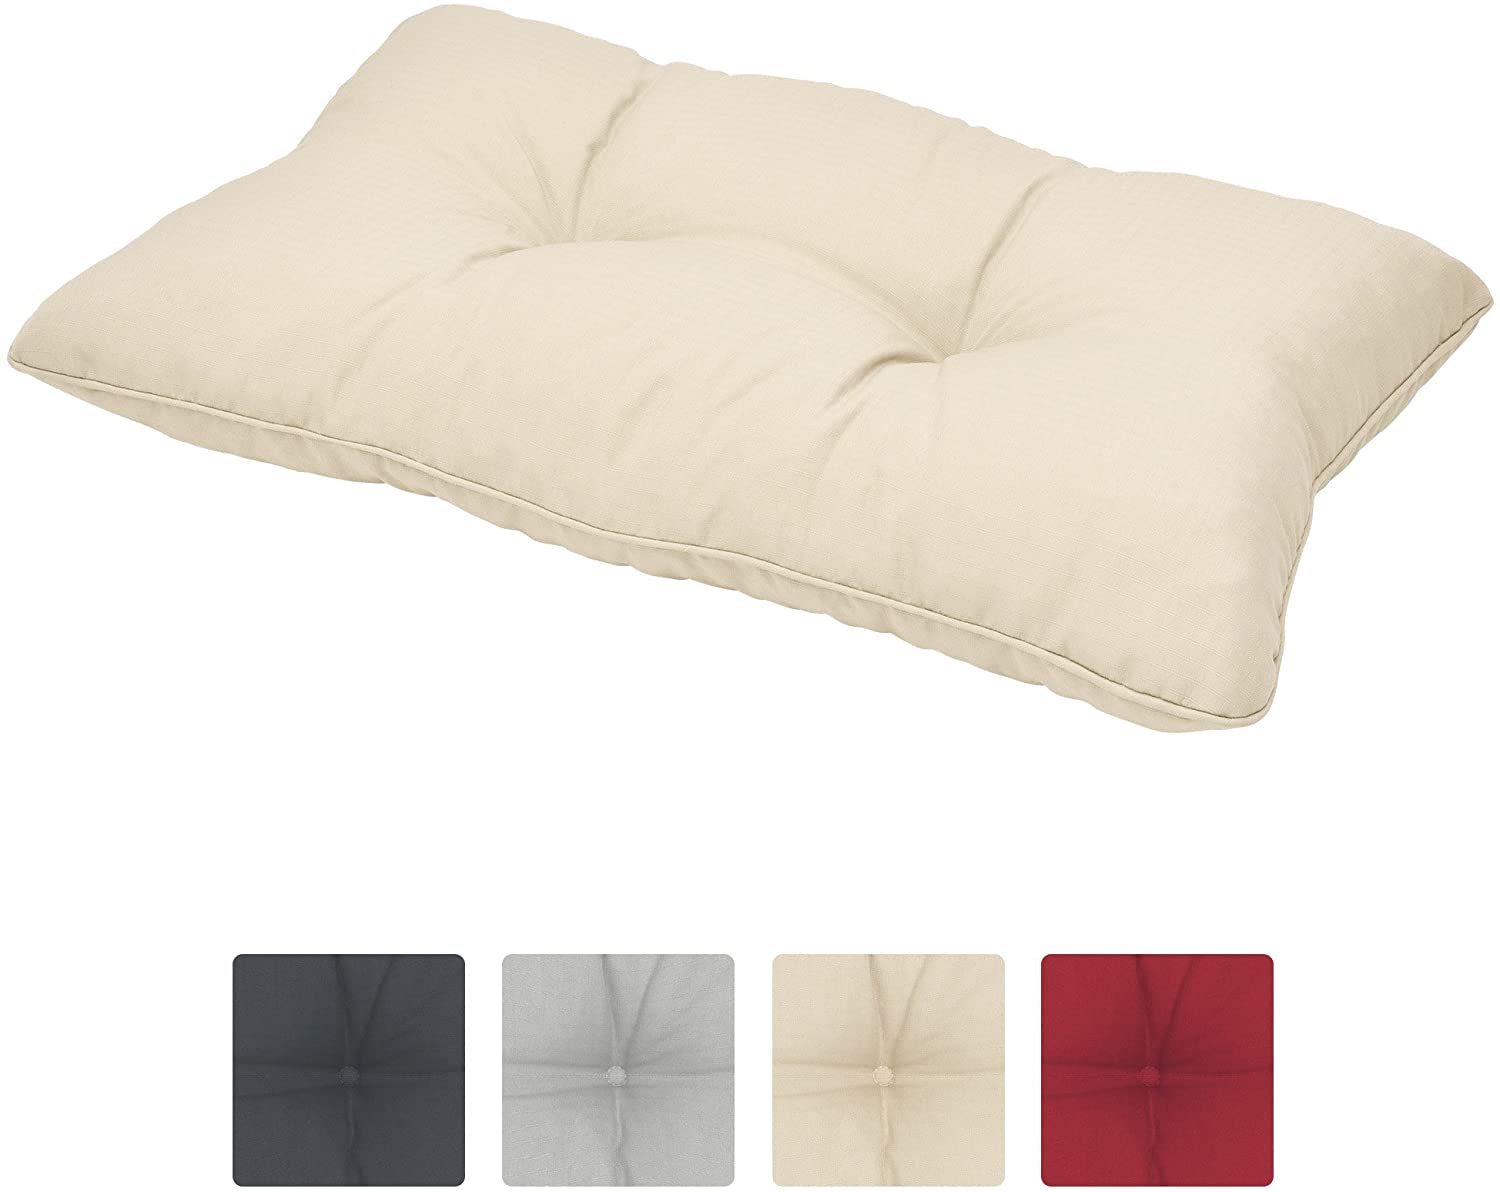 Beautissu Lounge Cushion Xluna - Seat And Back Cushions In Various Colours 